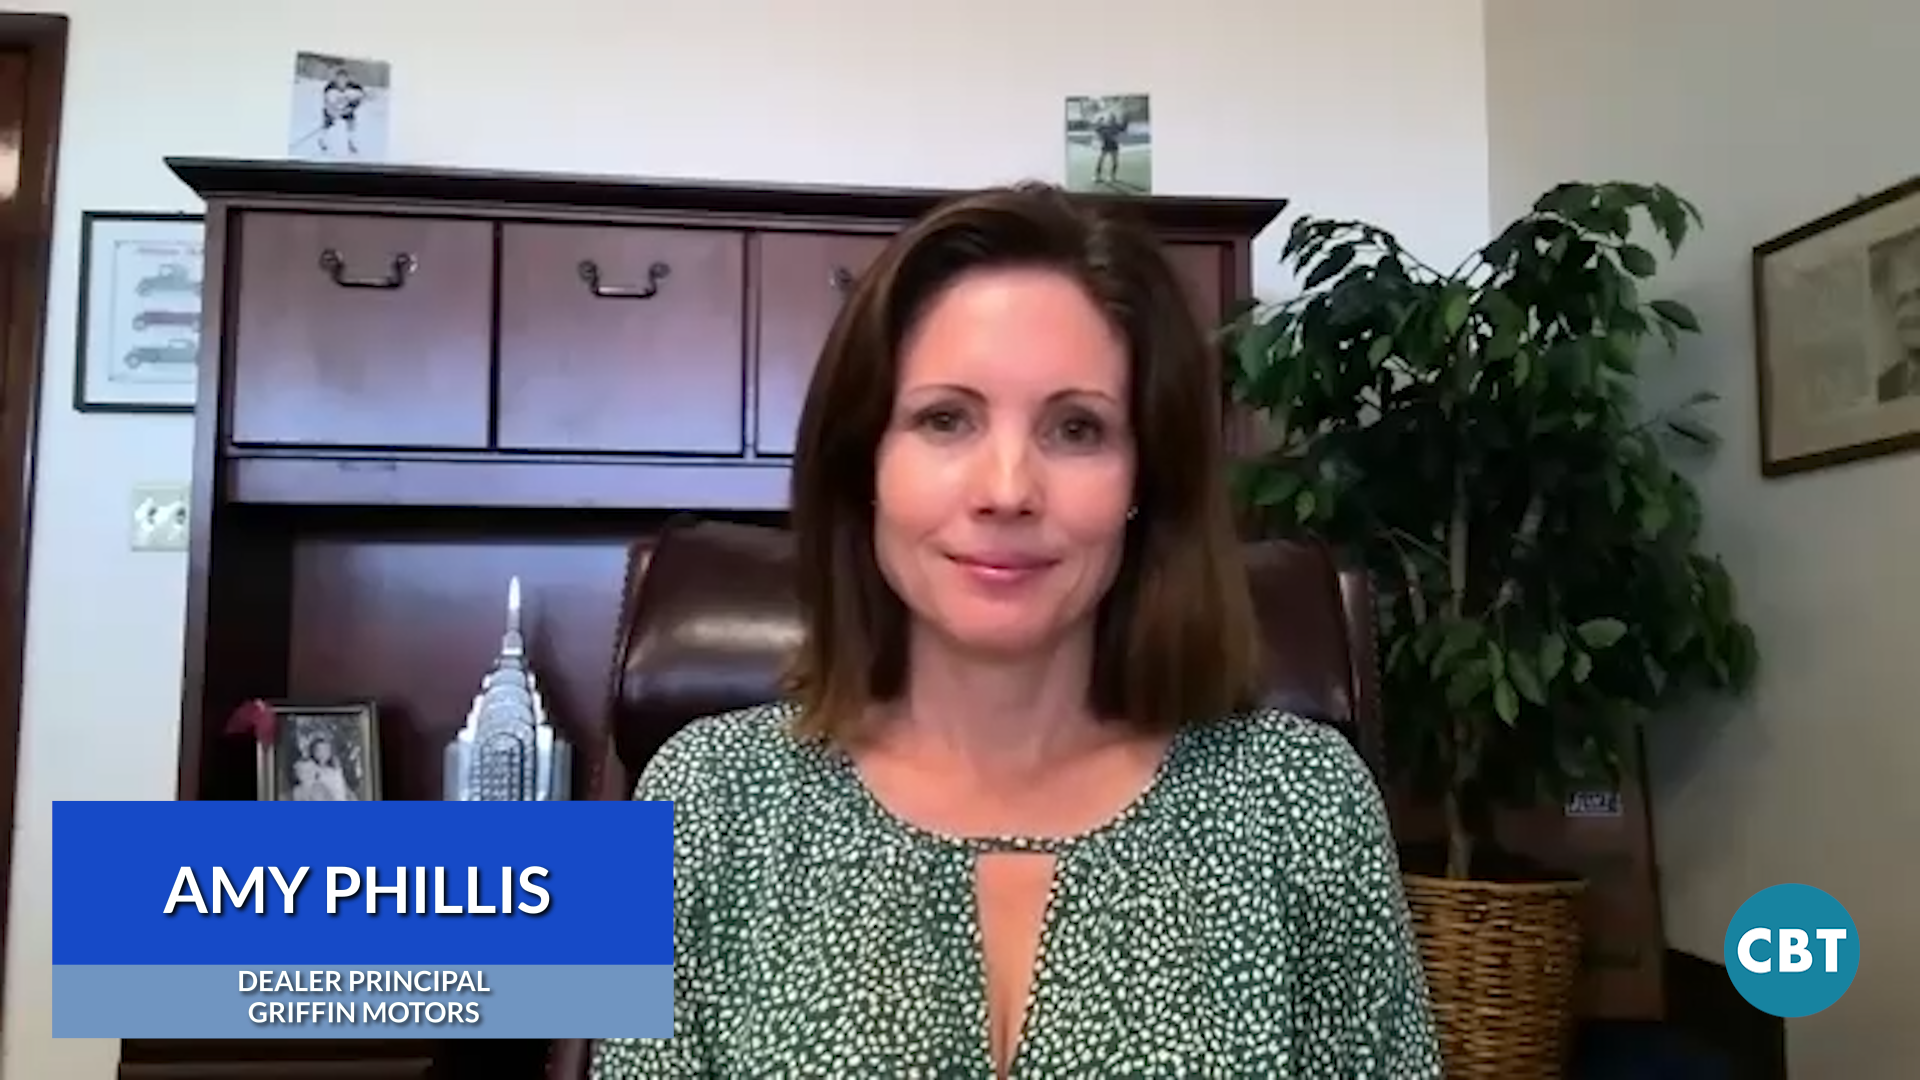 Dealer Amy Phillis discusses careers for women in the automotive industry